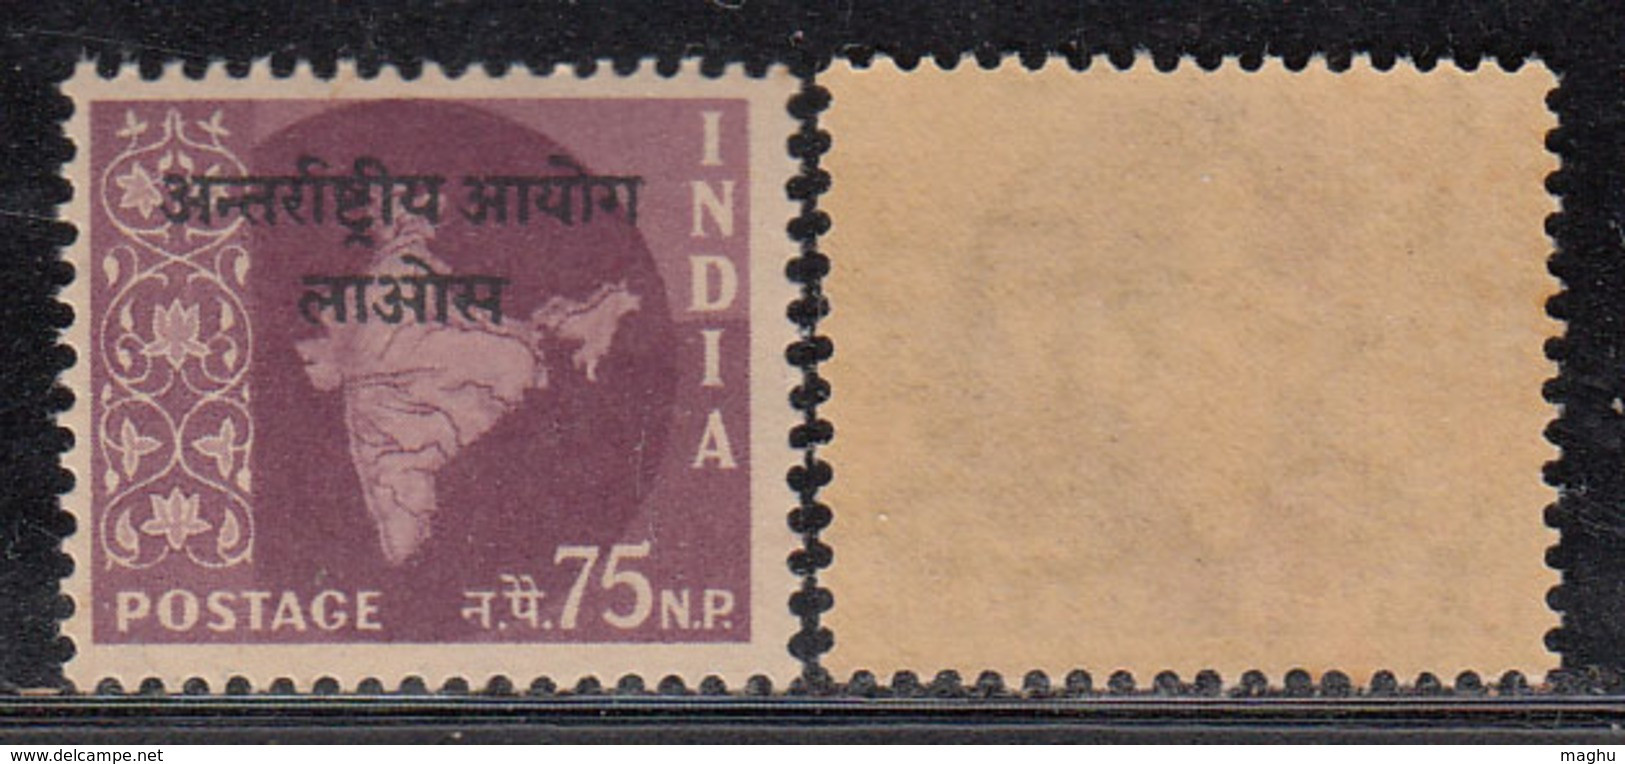 75np Ovpt  Laos On Map Series,  India MNH 1962 - 1965, Ashokan Watermark, - Franchise Militaire